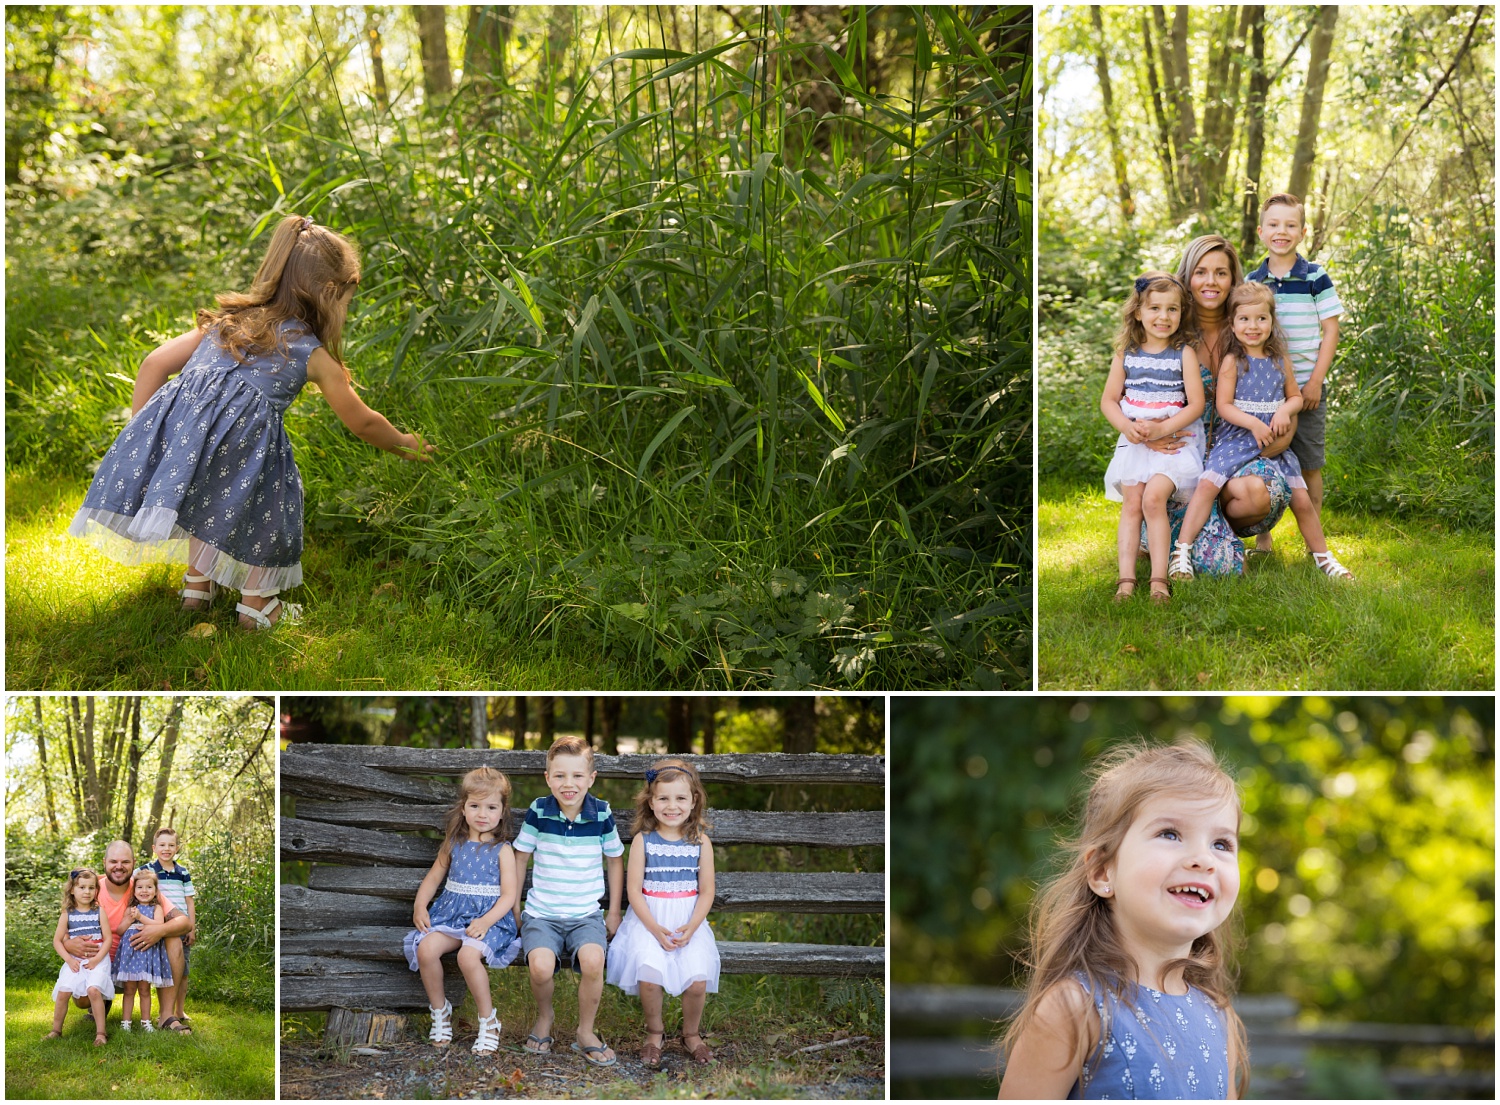 Amazing Day Photography - Campbell Valley Family Session - Langley Family Photographer (6).jpg